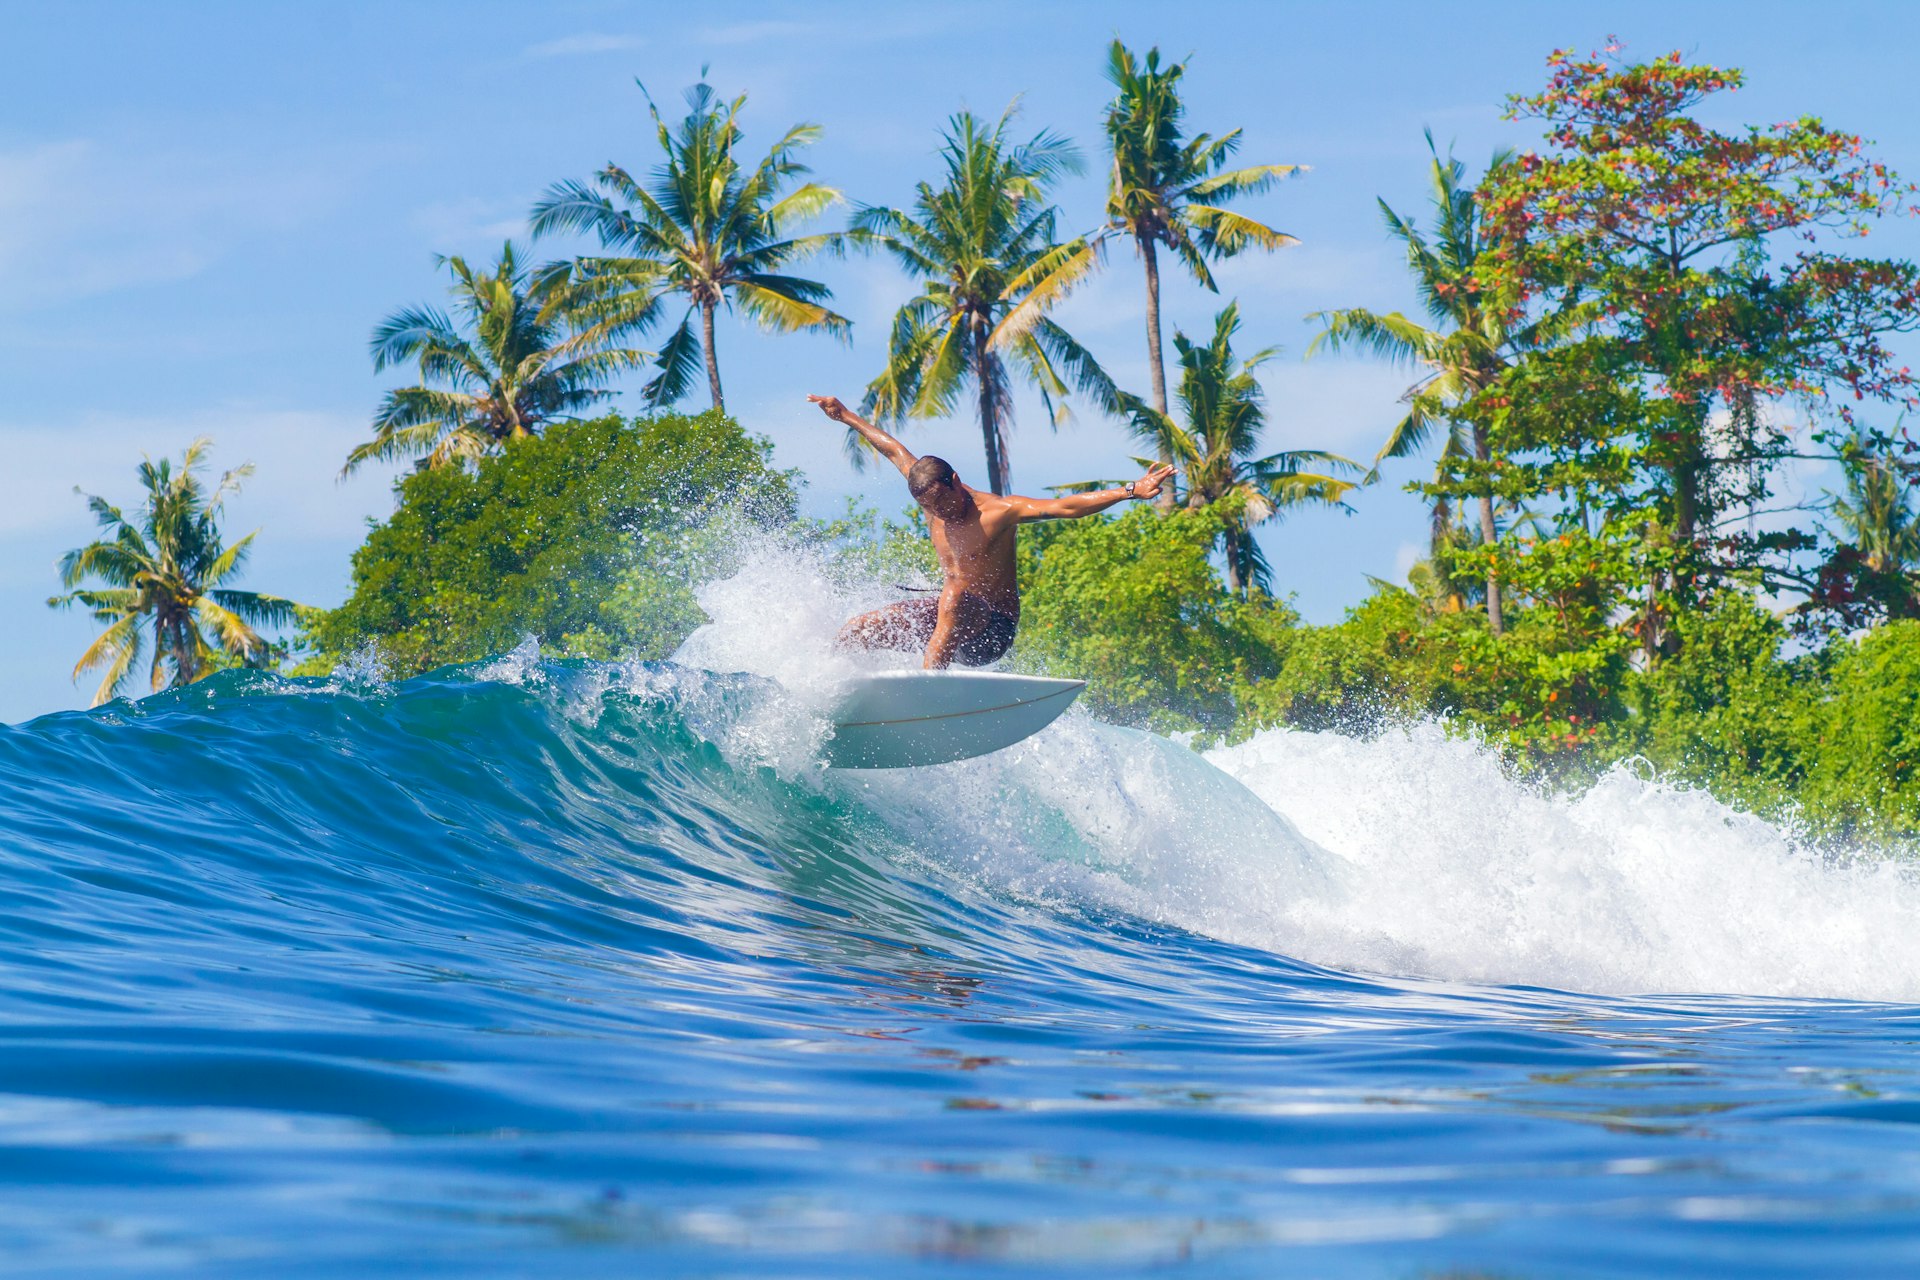 A shirtless man rides a wave in the waters around Bali, Indonesia, with tropical palm trees in the background